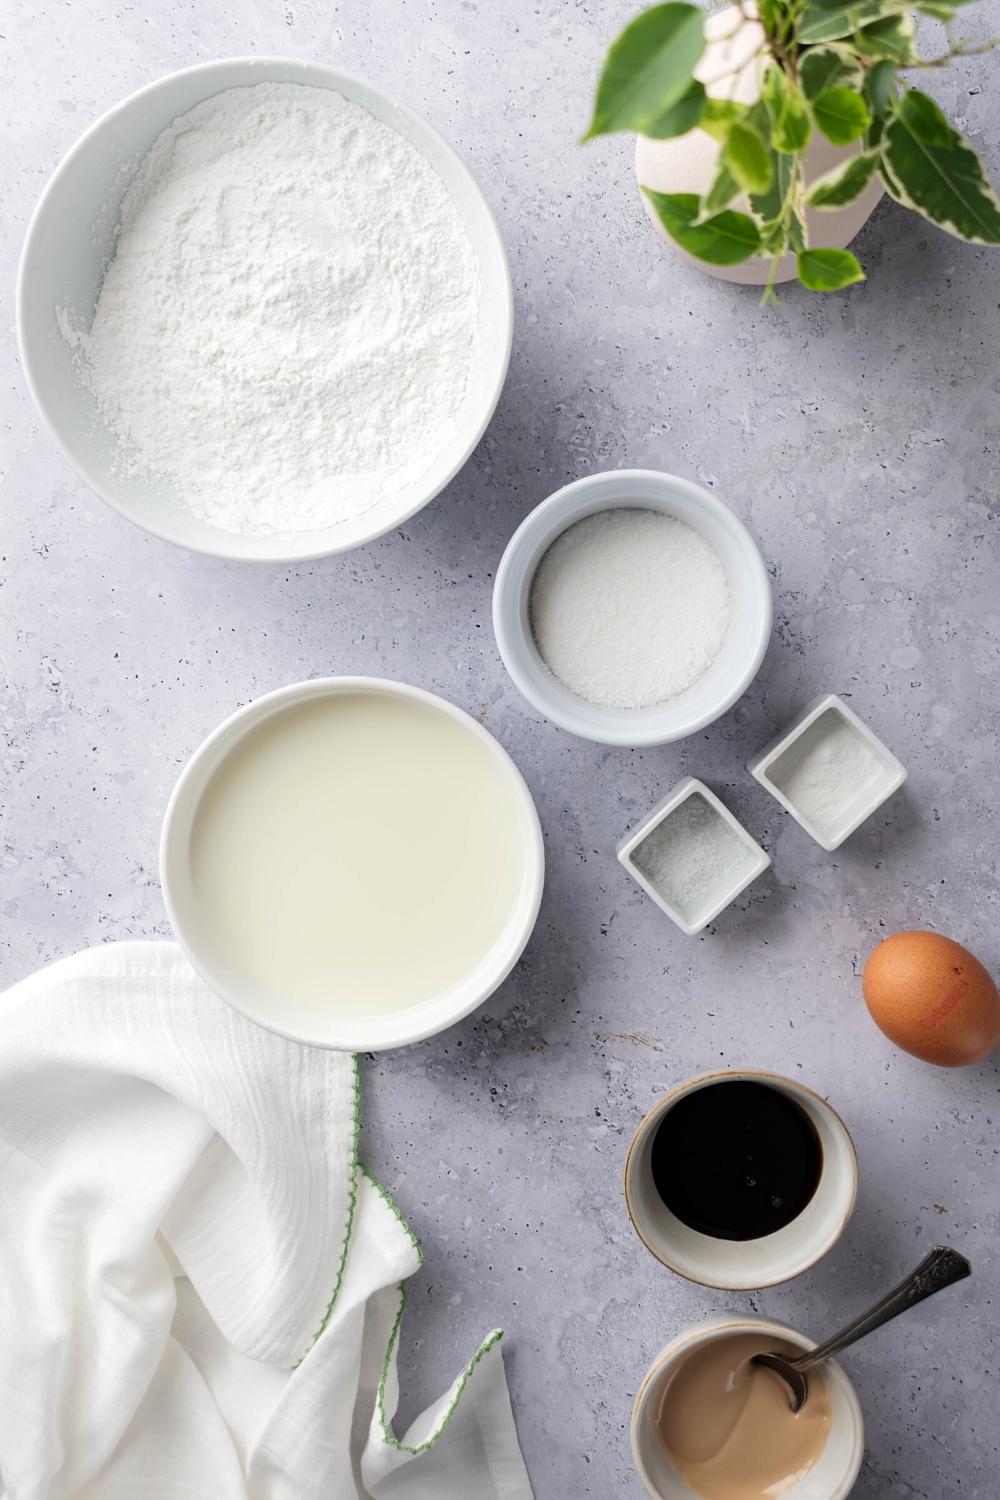 A bowl of sweet rice flour, a bowl of sugar, a bowl of milk, an egg, and a bowl of baking powder all on a gray counter.